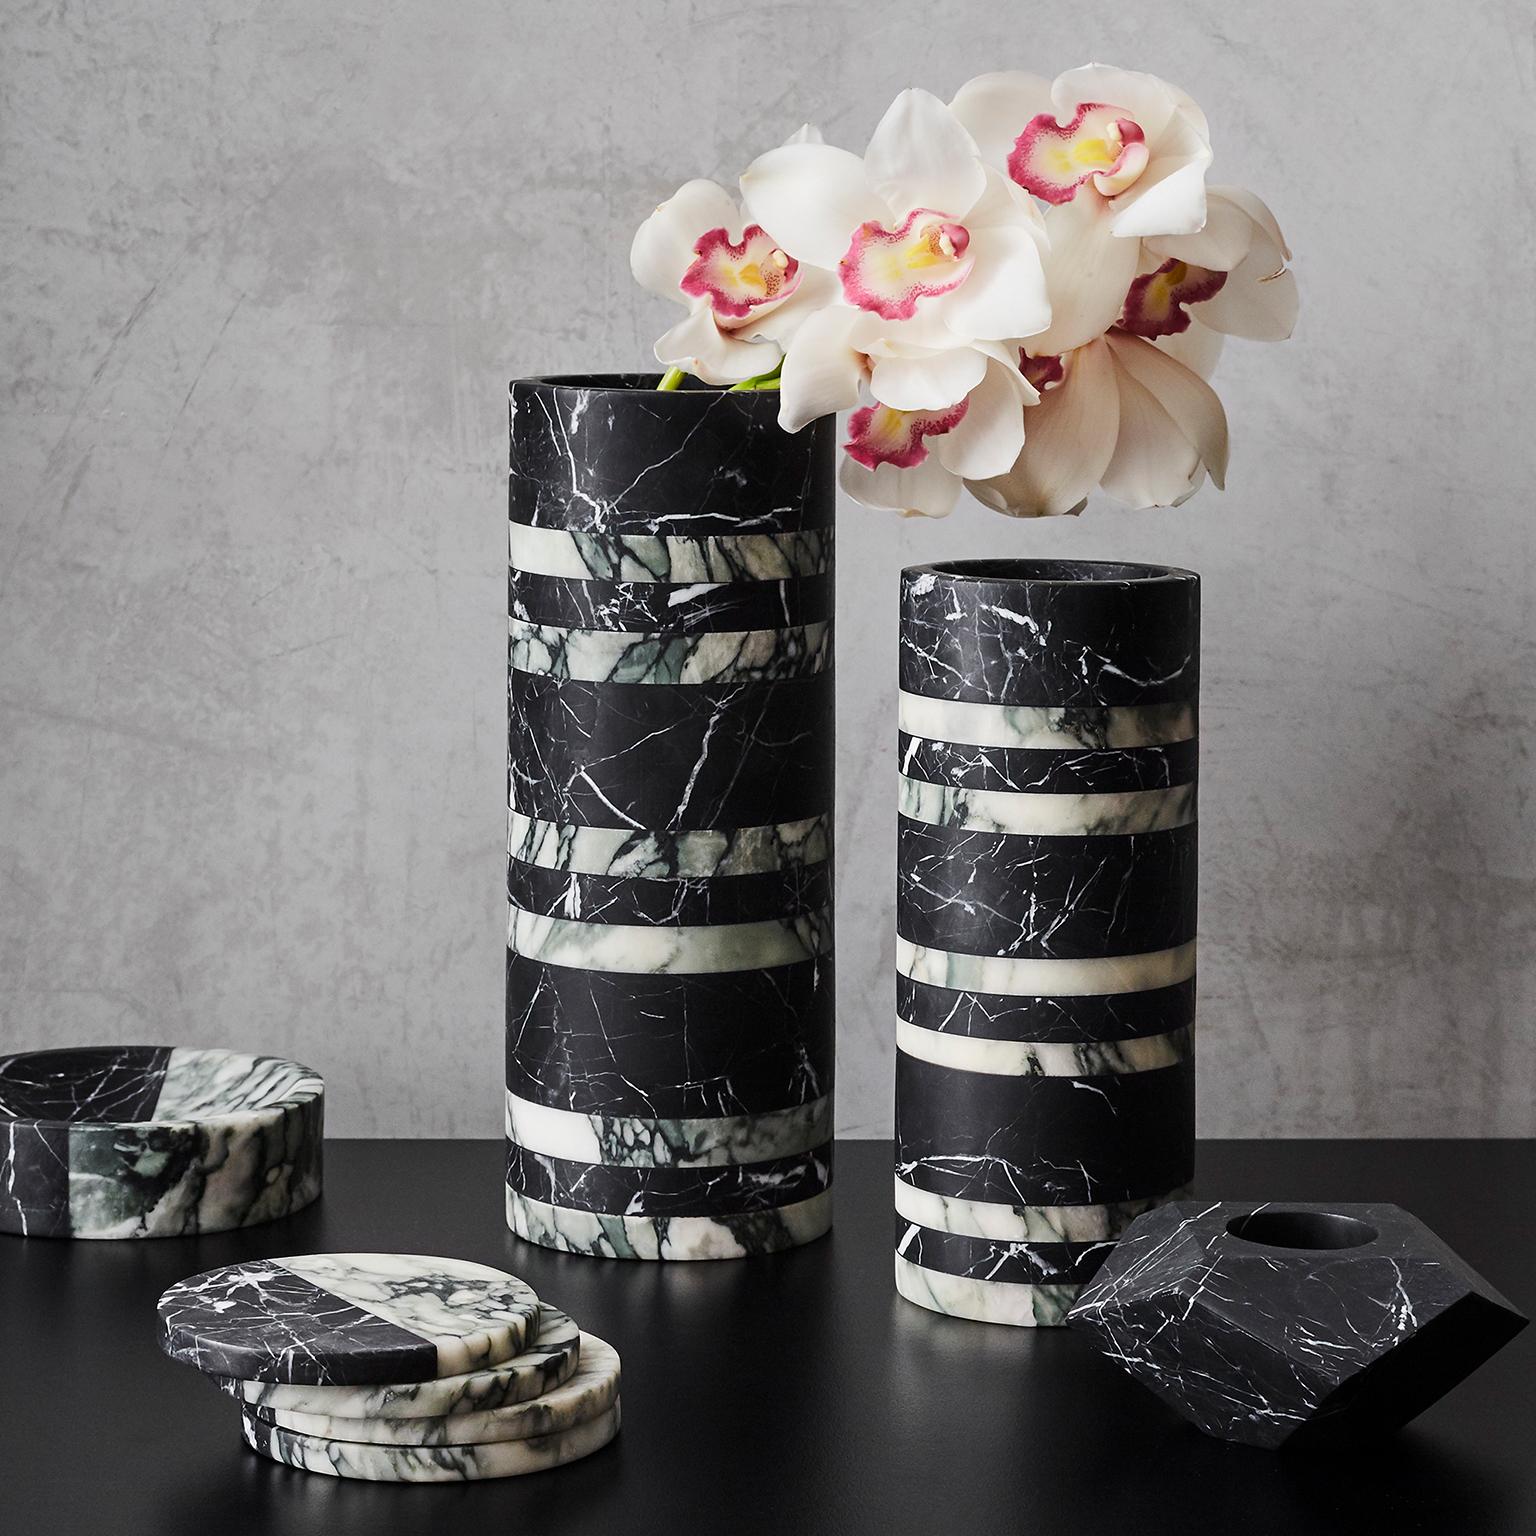 The shifting, faceted edges of this smart marble ornament lend it well to decorative use or as a tea light holder. The Gem collection of ornaments offer three sizes in a range of stones. 

Dimensions: D123 x 53 H mm
Materials: Nero